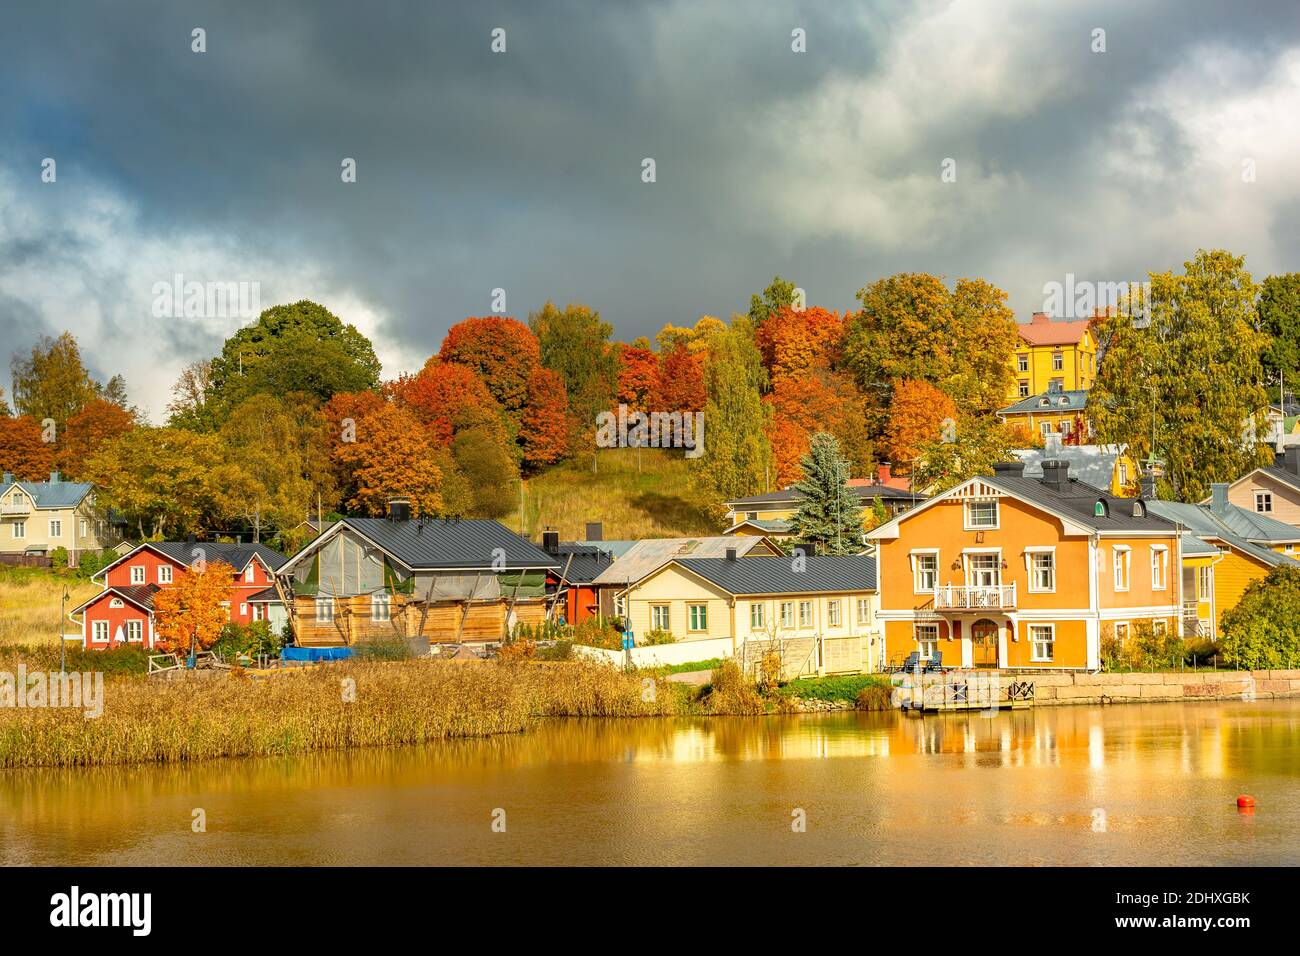 Old town of Porvoo in Finland. Stock Photo